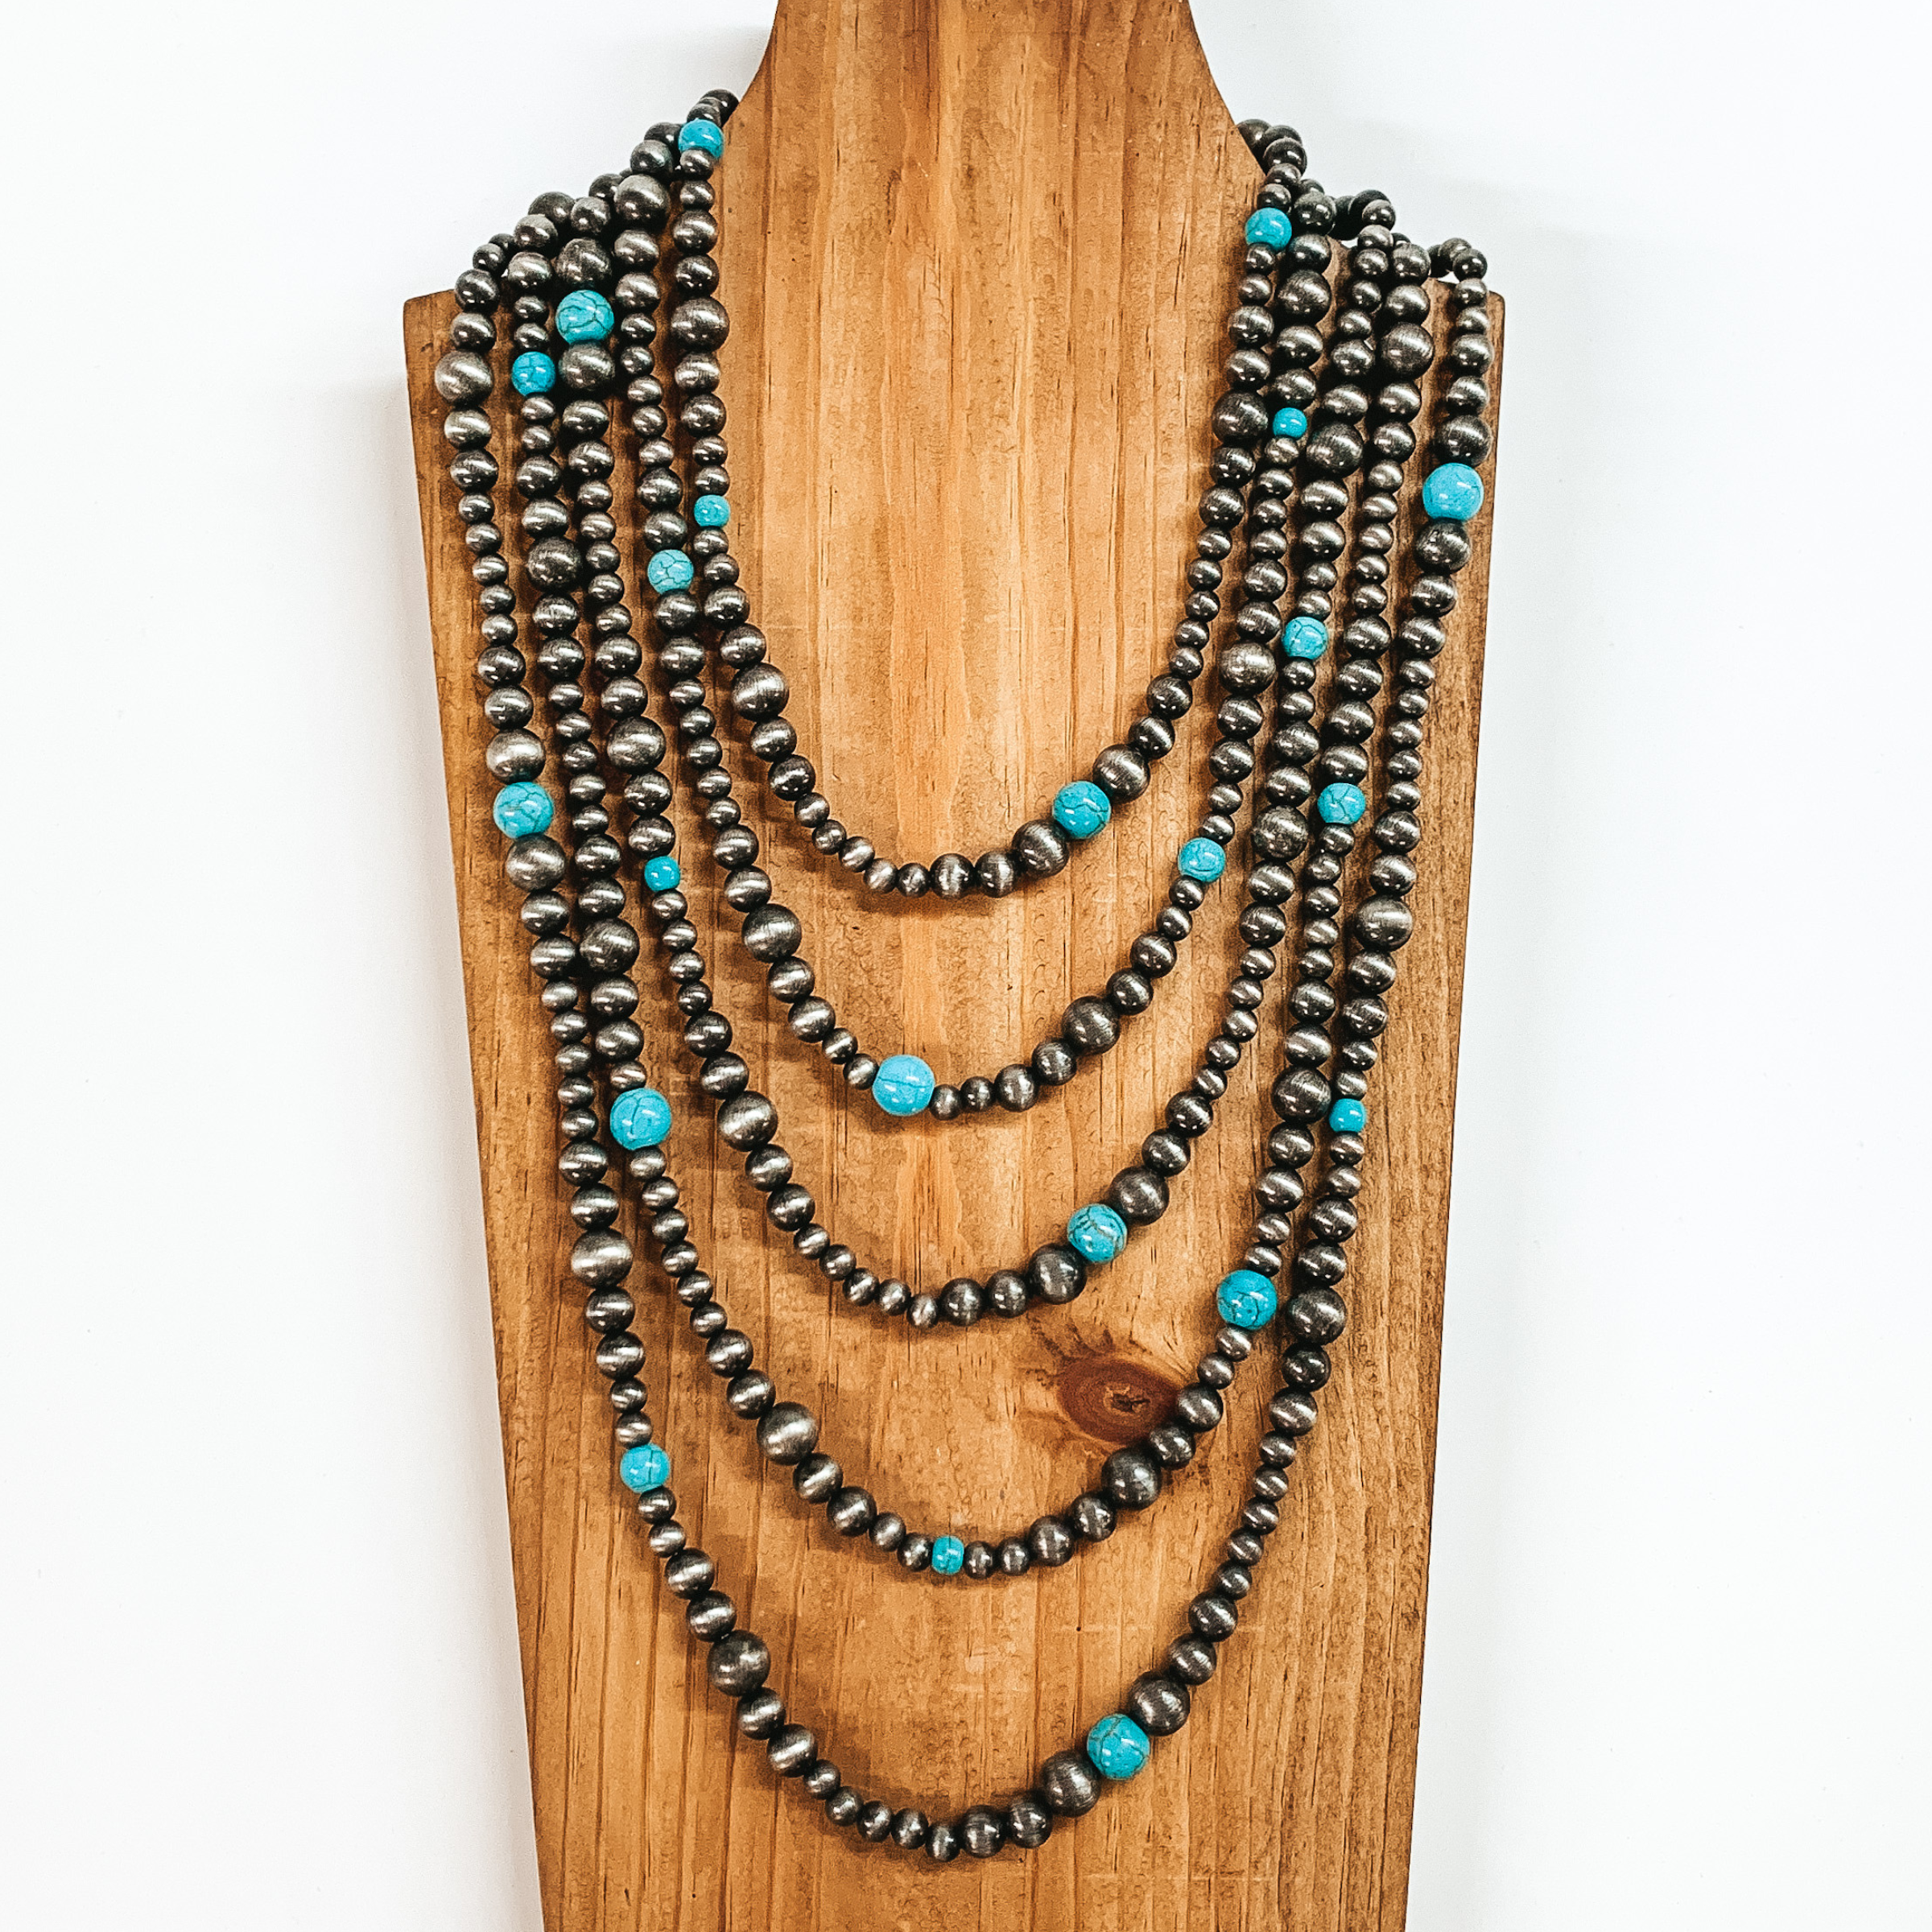 Five strand necklace that is mostly silver beads with a some turquoise bead spacers. This necklace is pictured on a wooden necklace holder on a white background. 